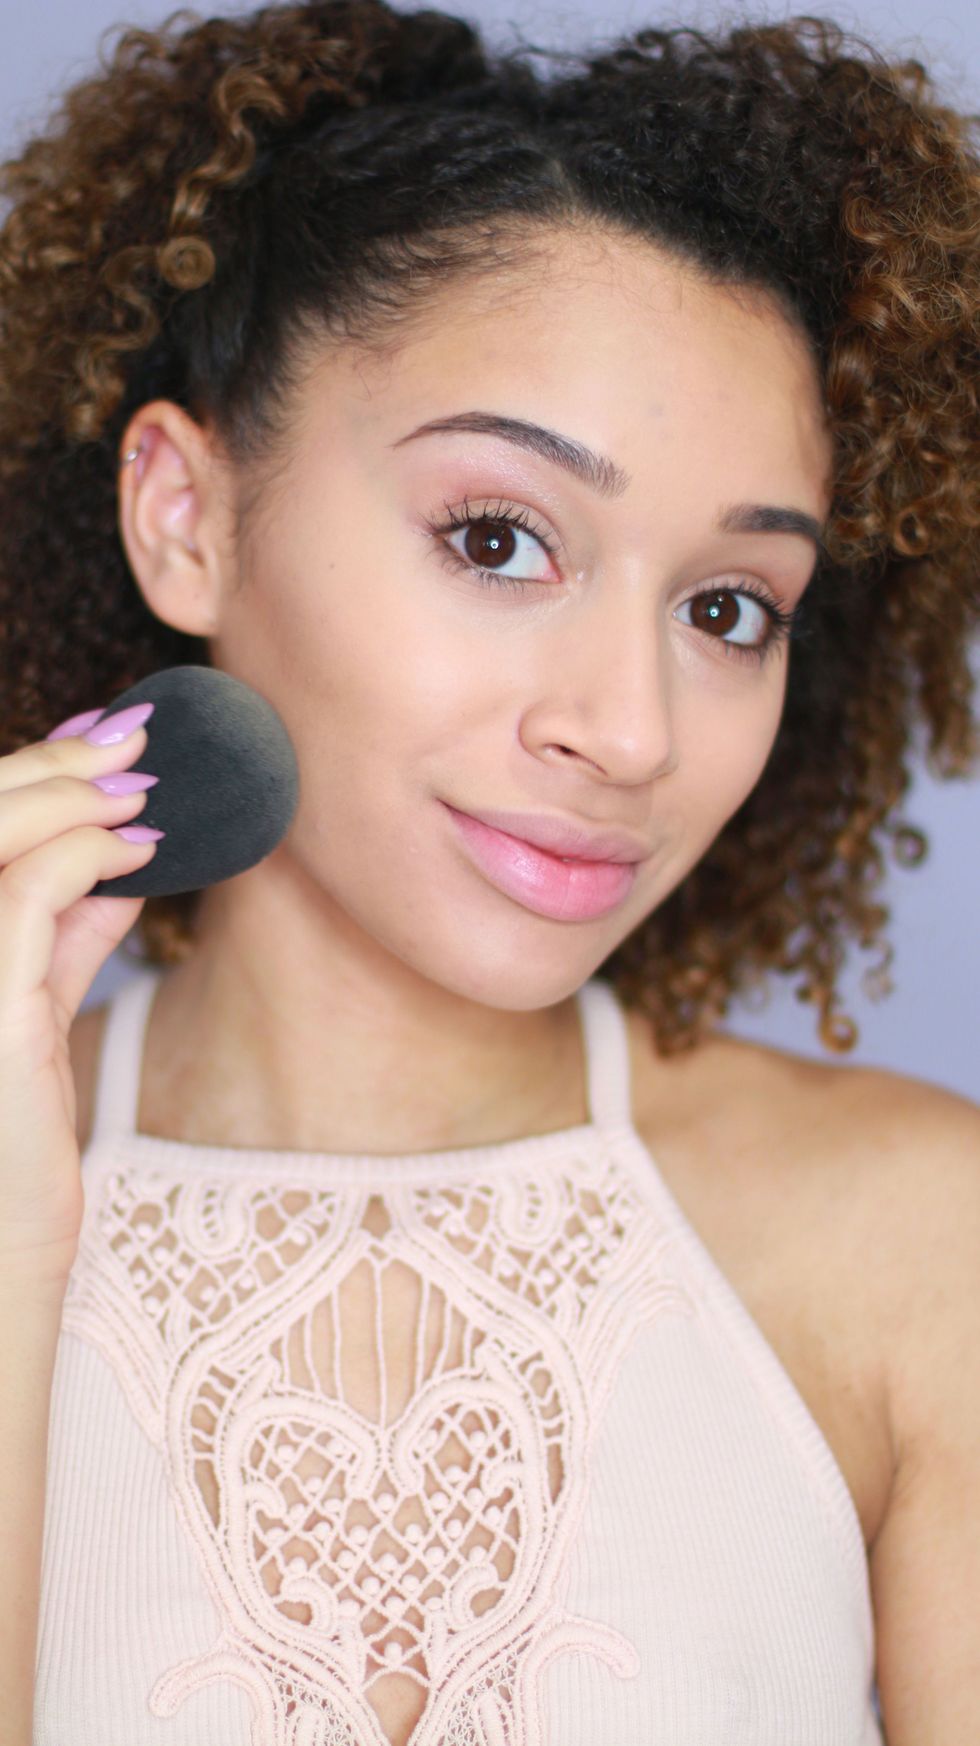 2 Super Easy Ways to Make Your Contour Look Natural - Easy Contouring Tricks